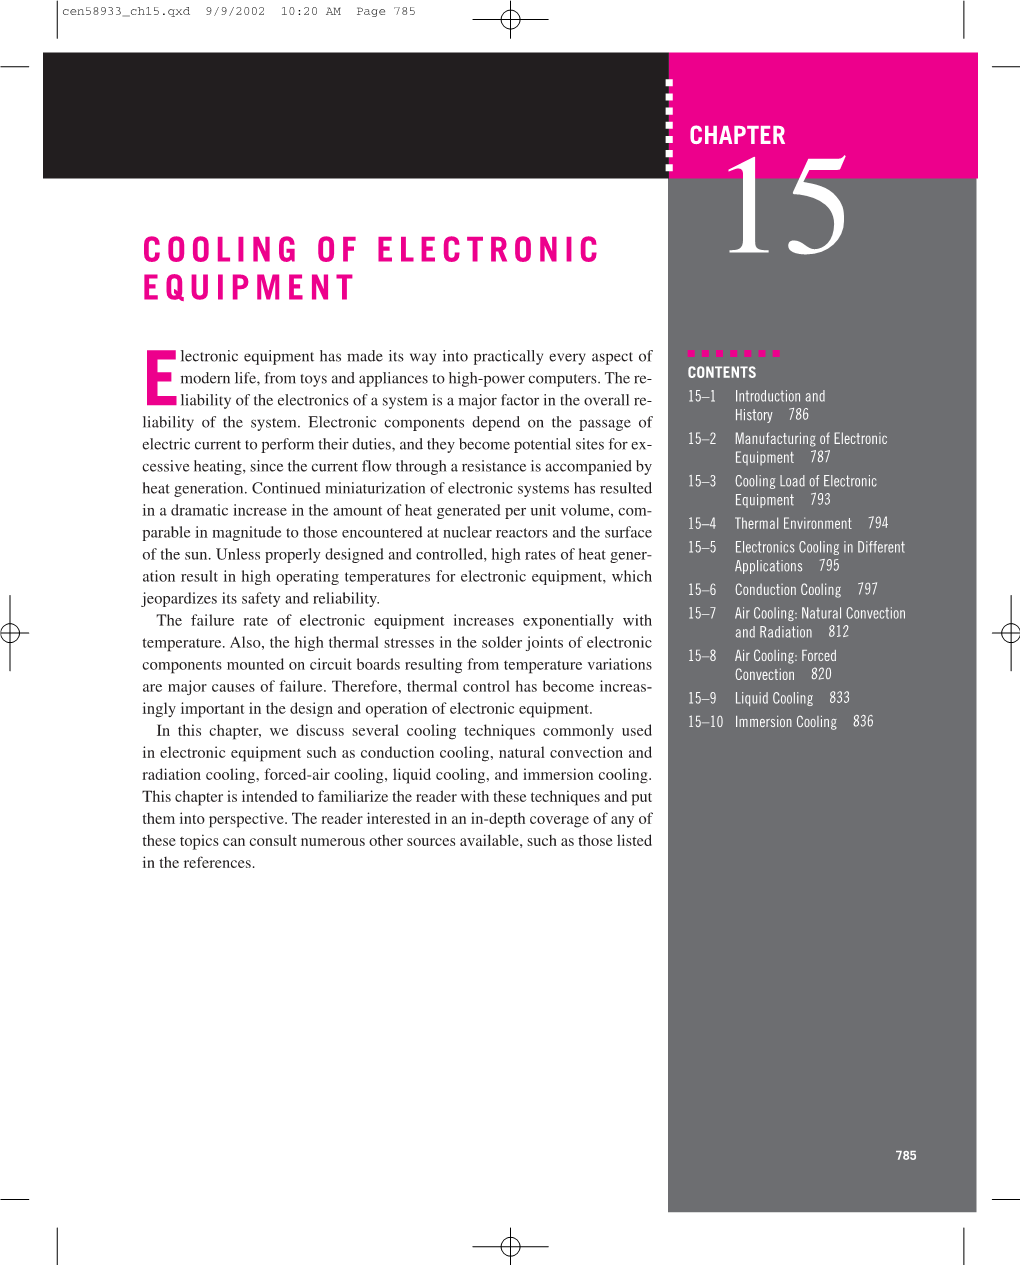 Cooling of Electronic Equipment Vary Widely, Depending on the Particular Application